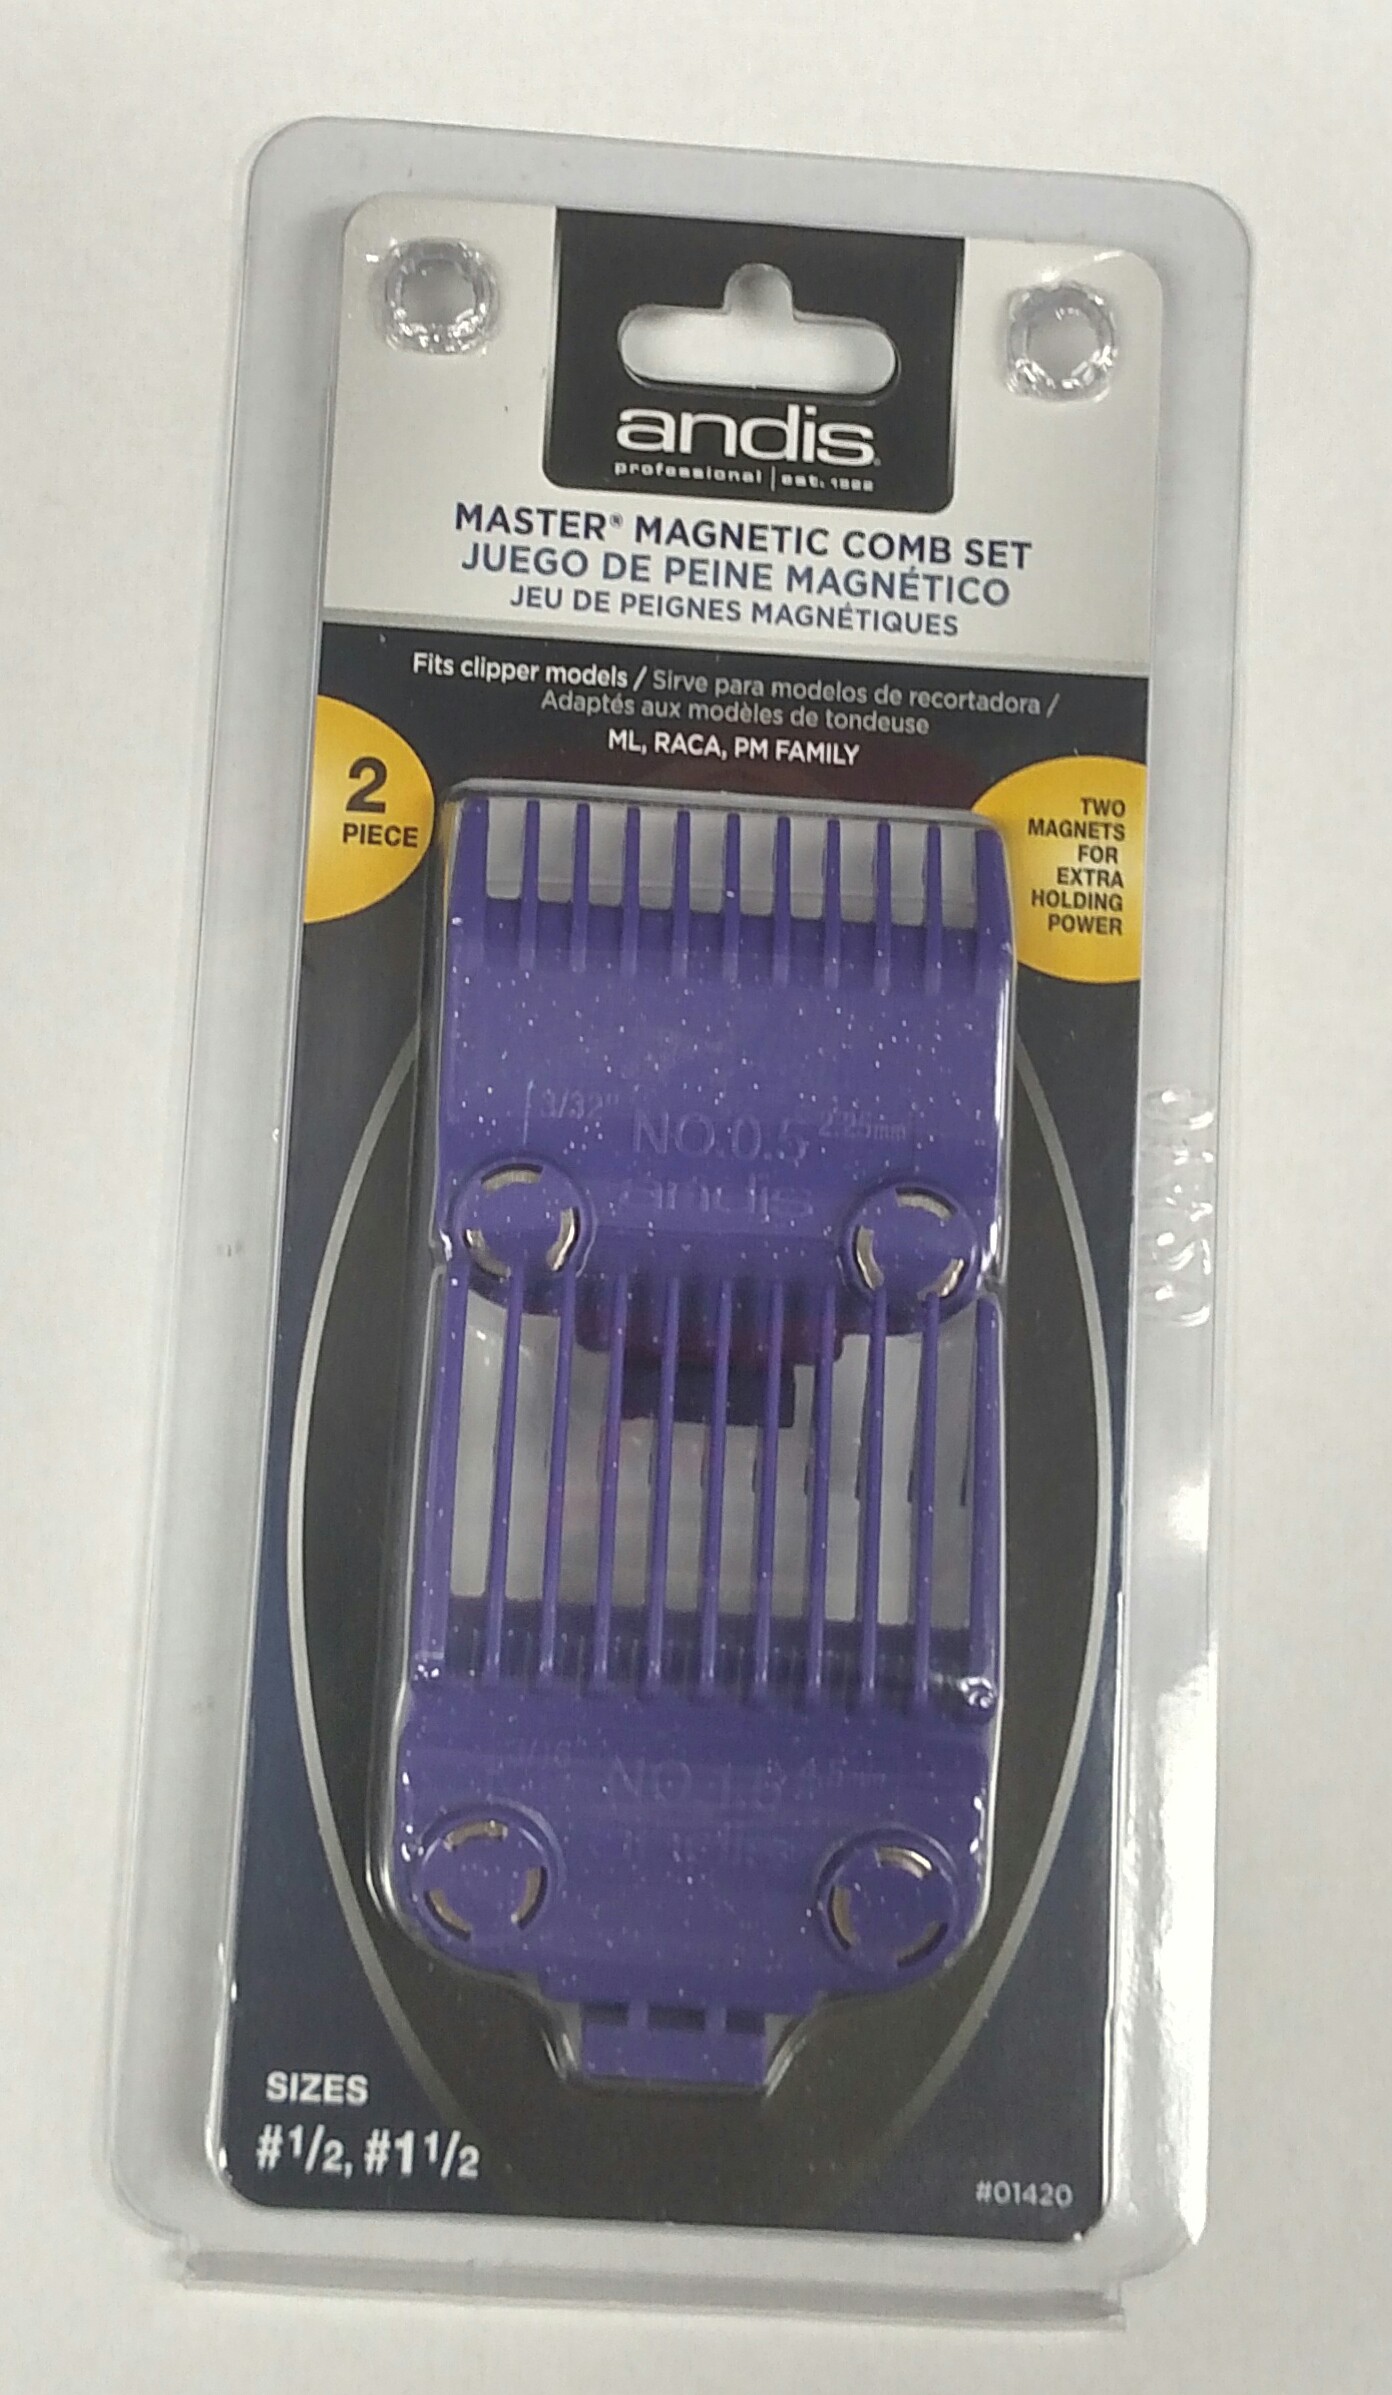 Andis Double Magnet Comb Set 1/2 and 1-1/2 7974